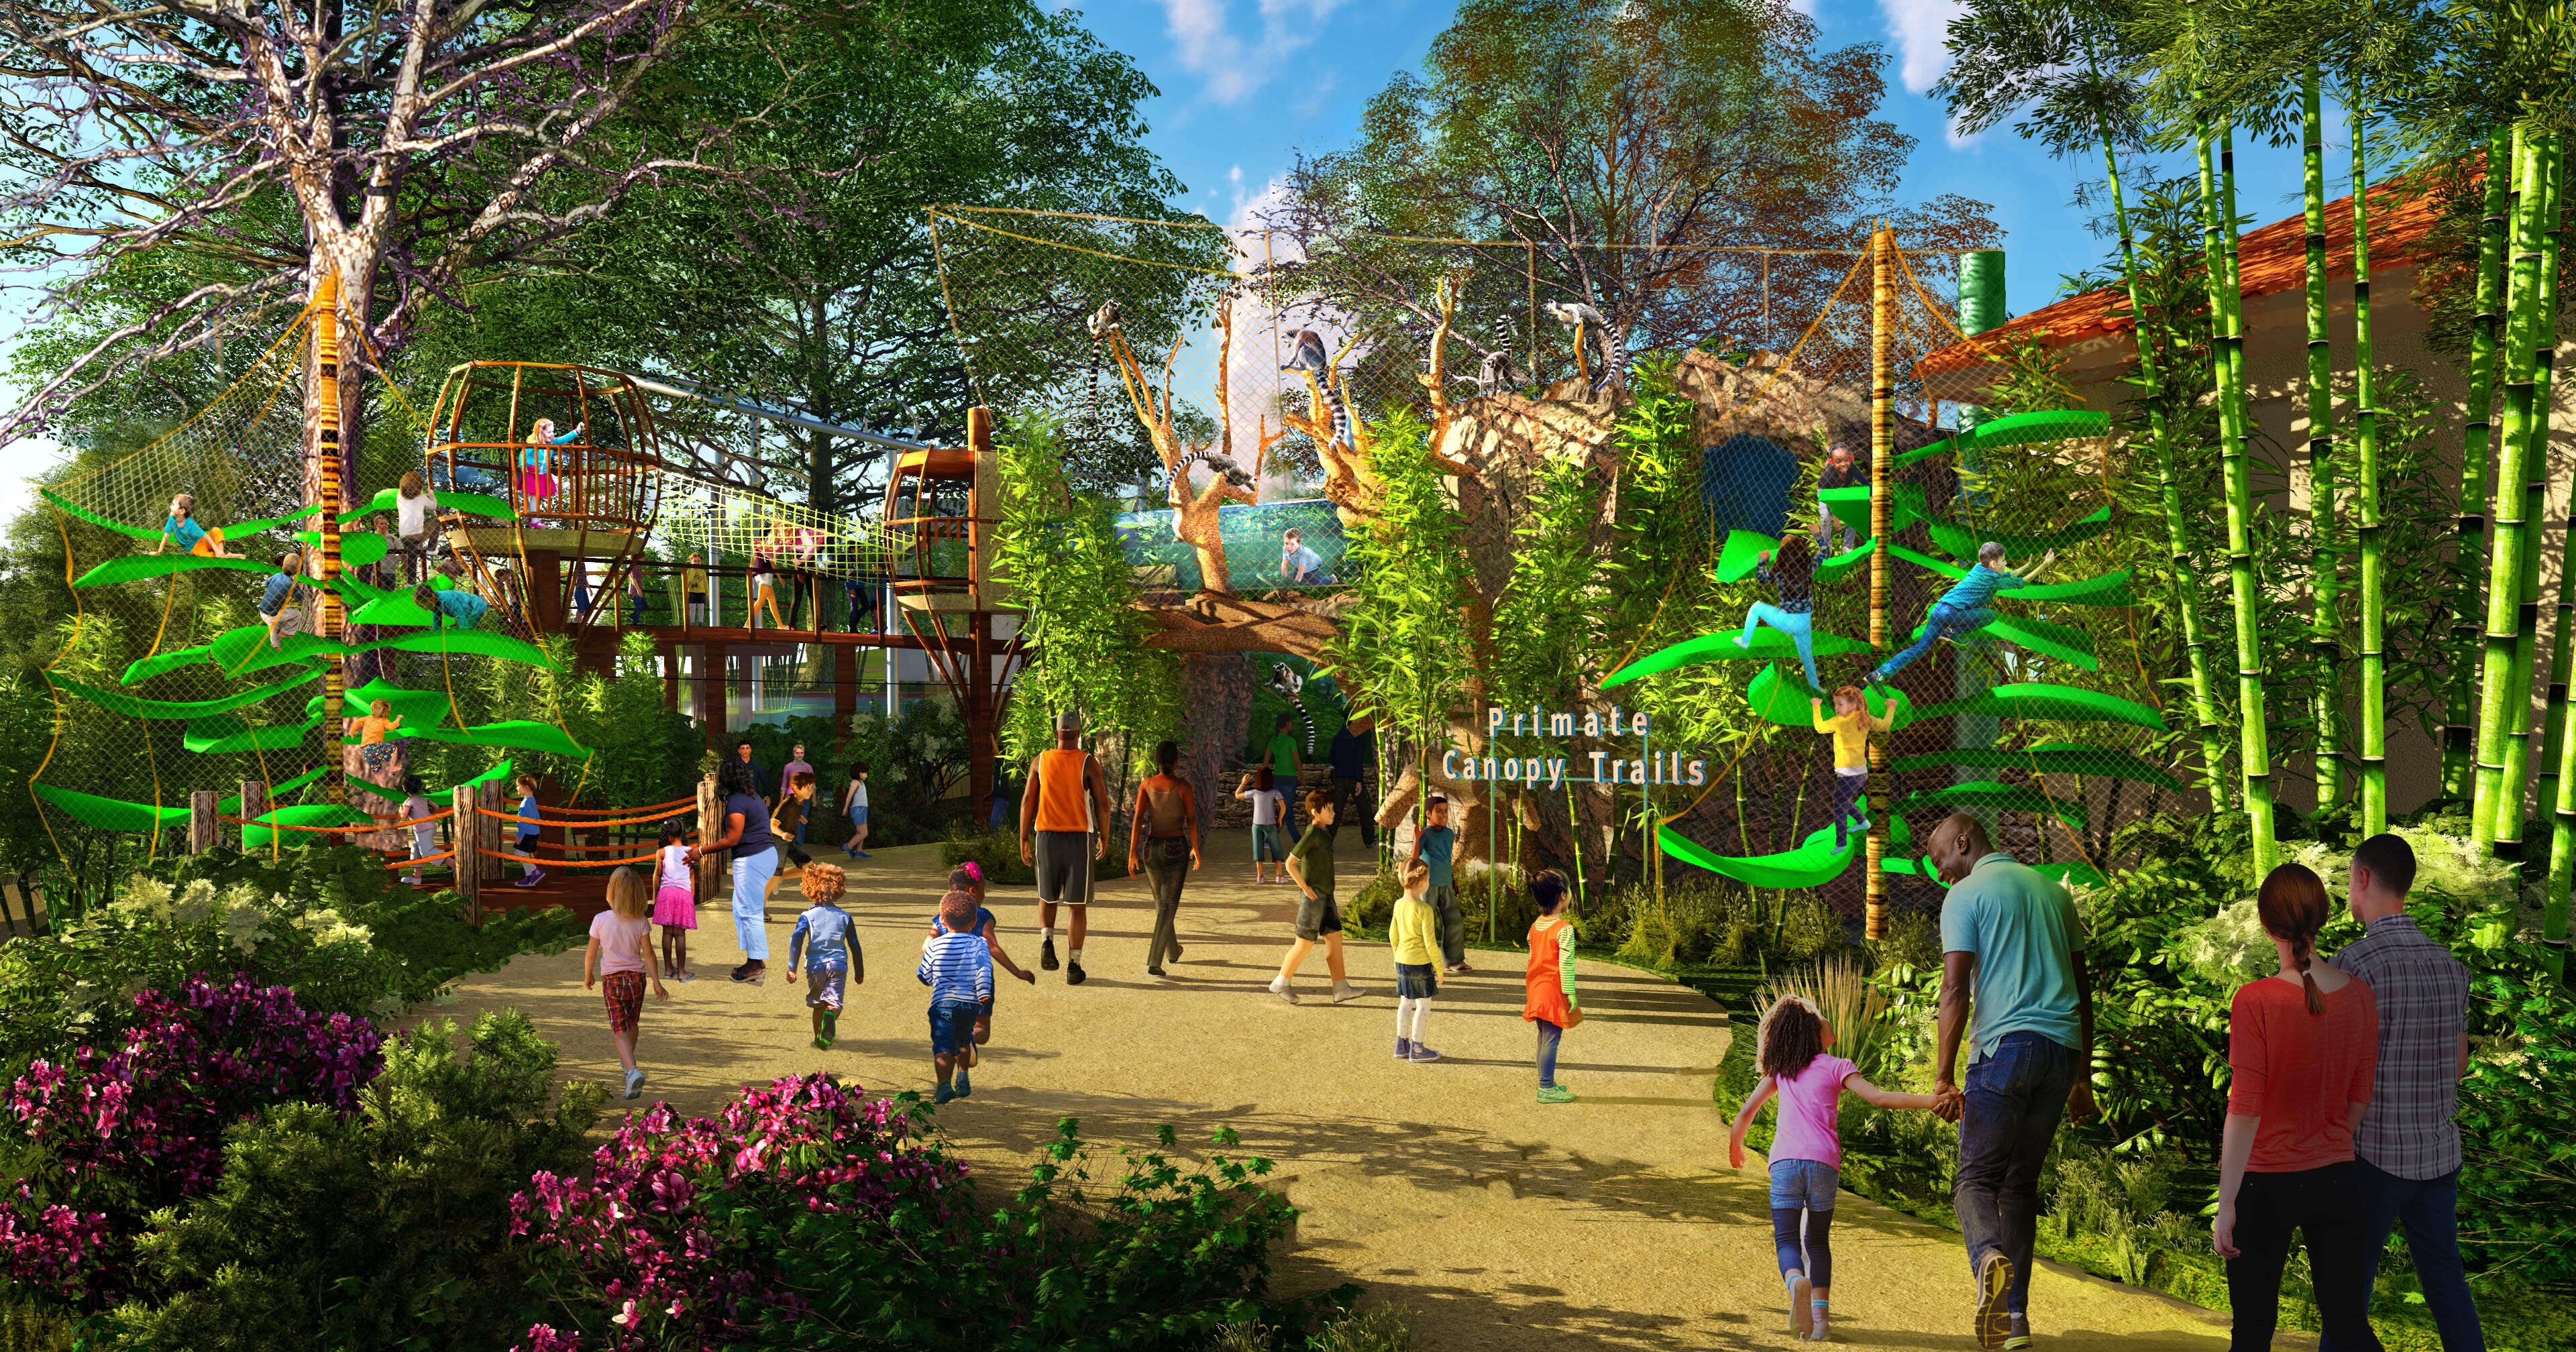 St. Louis Zoo will build more naturalistic habitat for monkeys, set to open in 2021 - Call ...